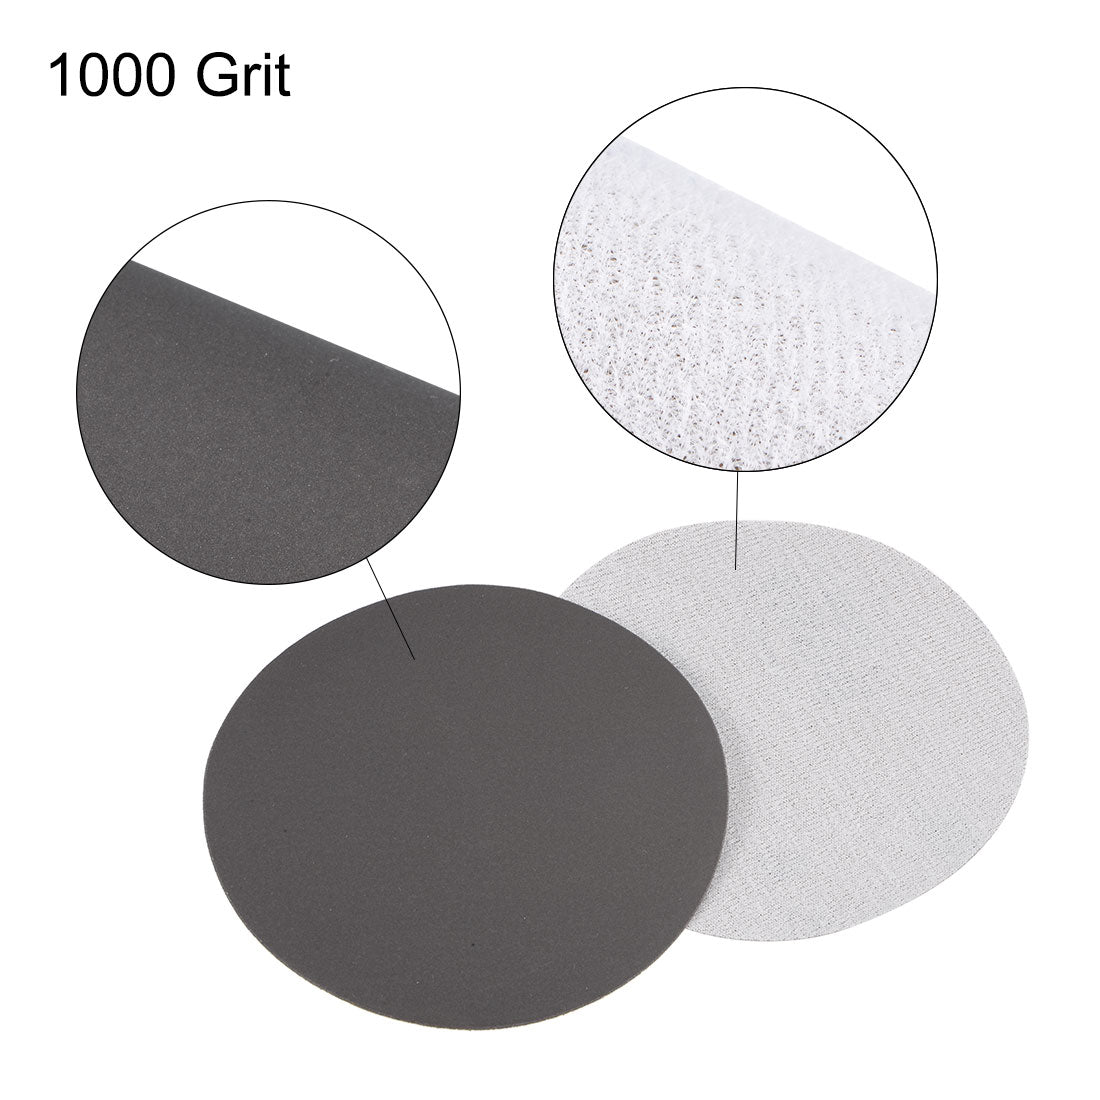 Uxcell Uxcell 5 inch Wet Dry Disc 2500 Grit Hook and Loop Sanding Disc Silicon Carbide 3pcs